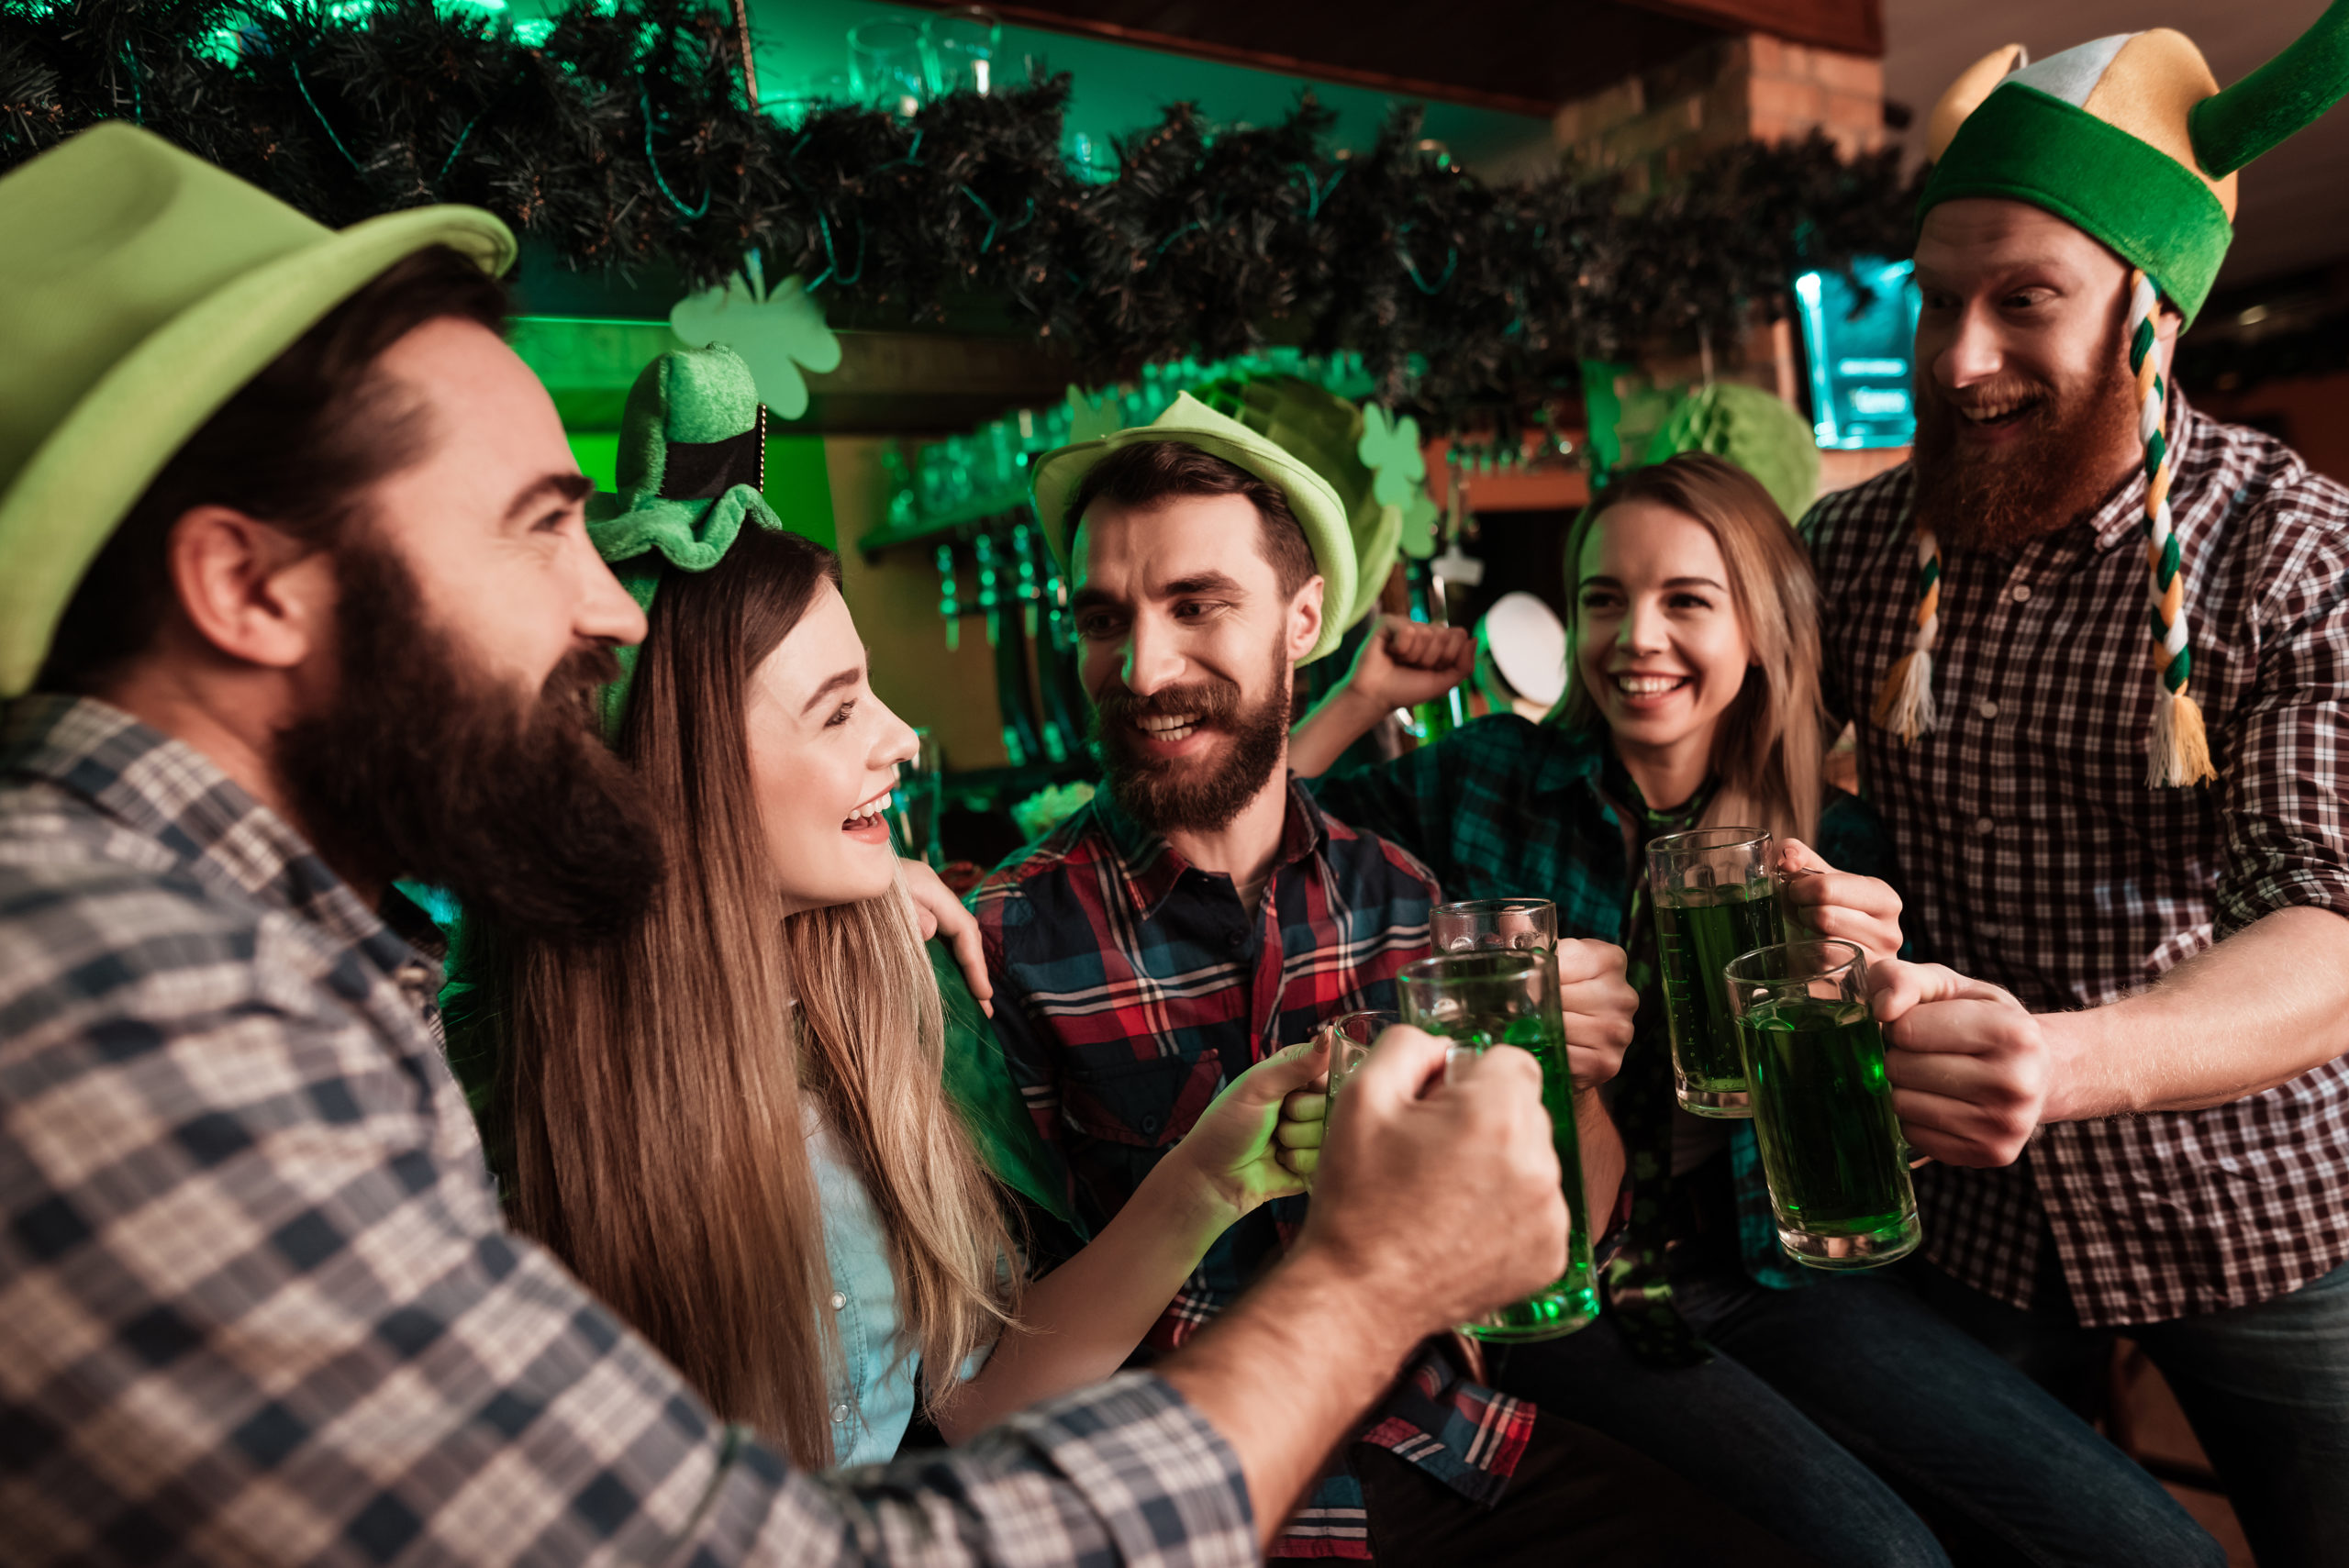 The company of young people celebrate St. Patrick's Day. They have fun at the bar. They are dressed in carnival headgear.